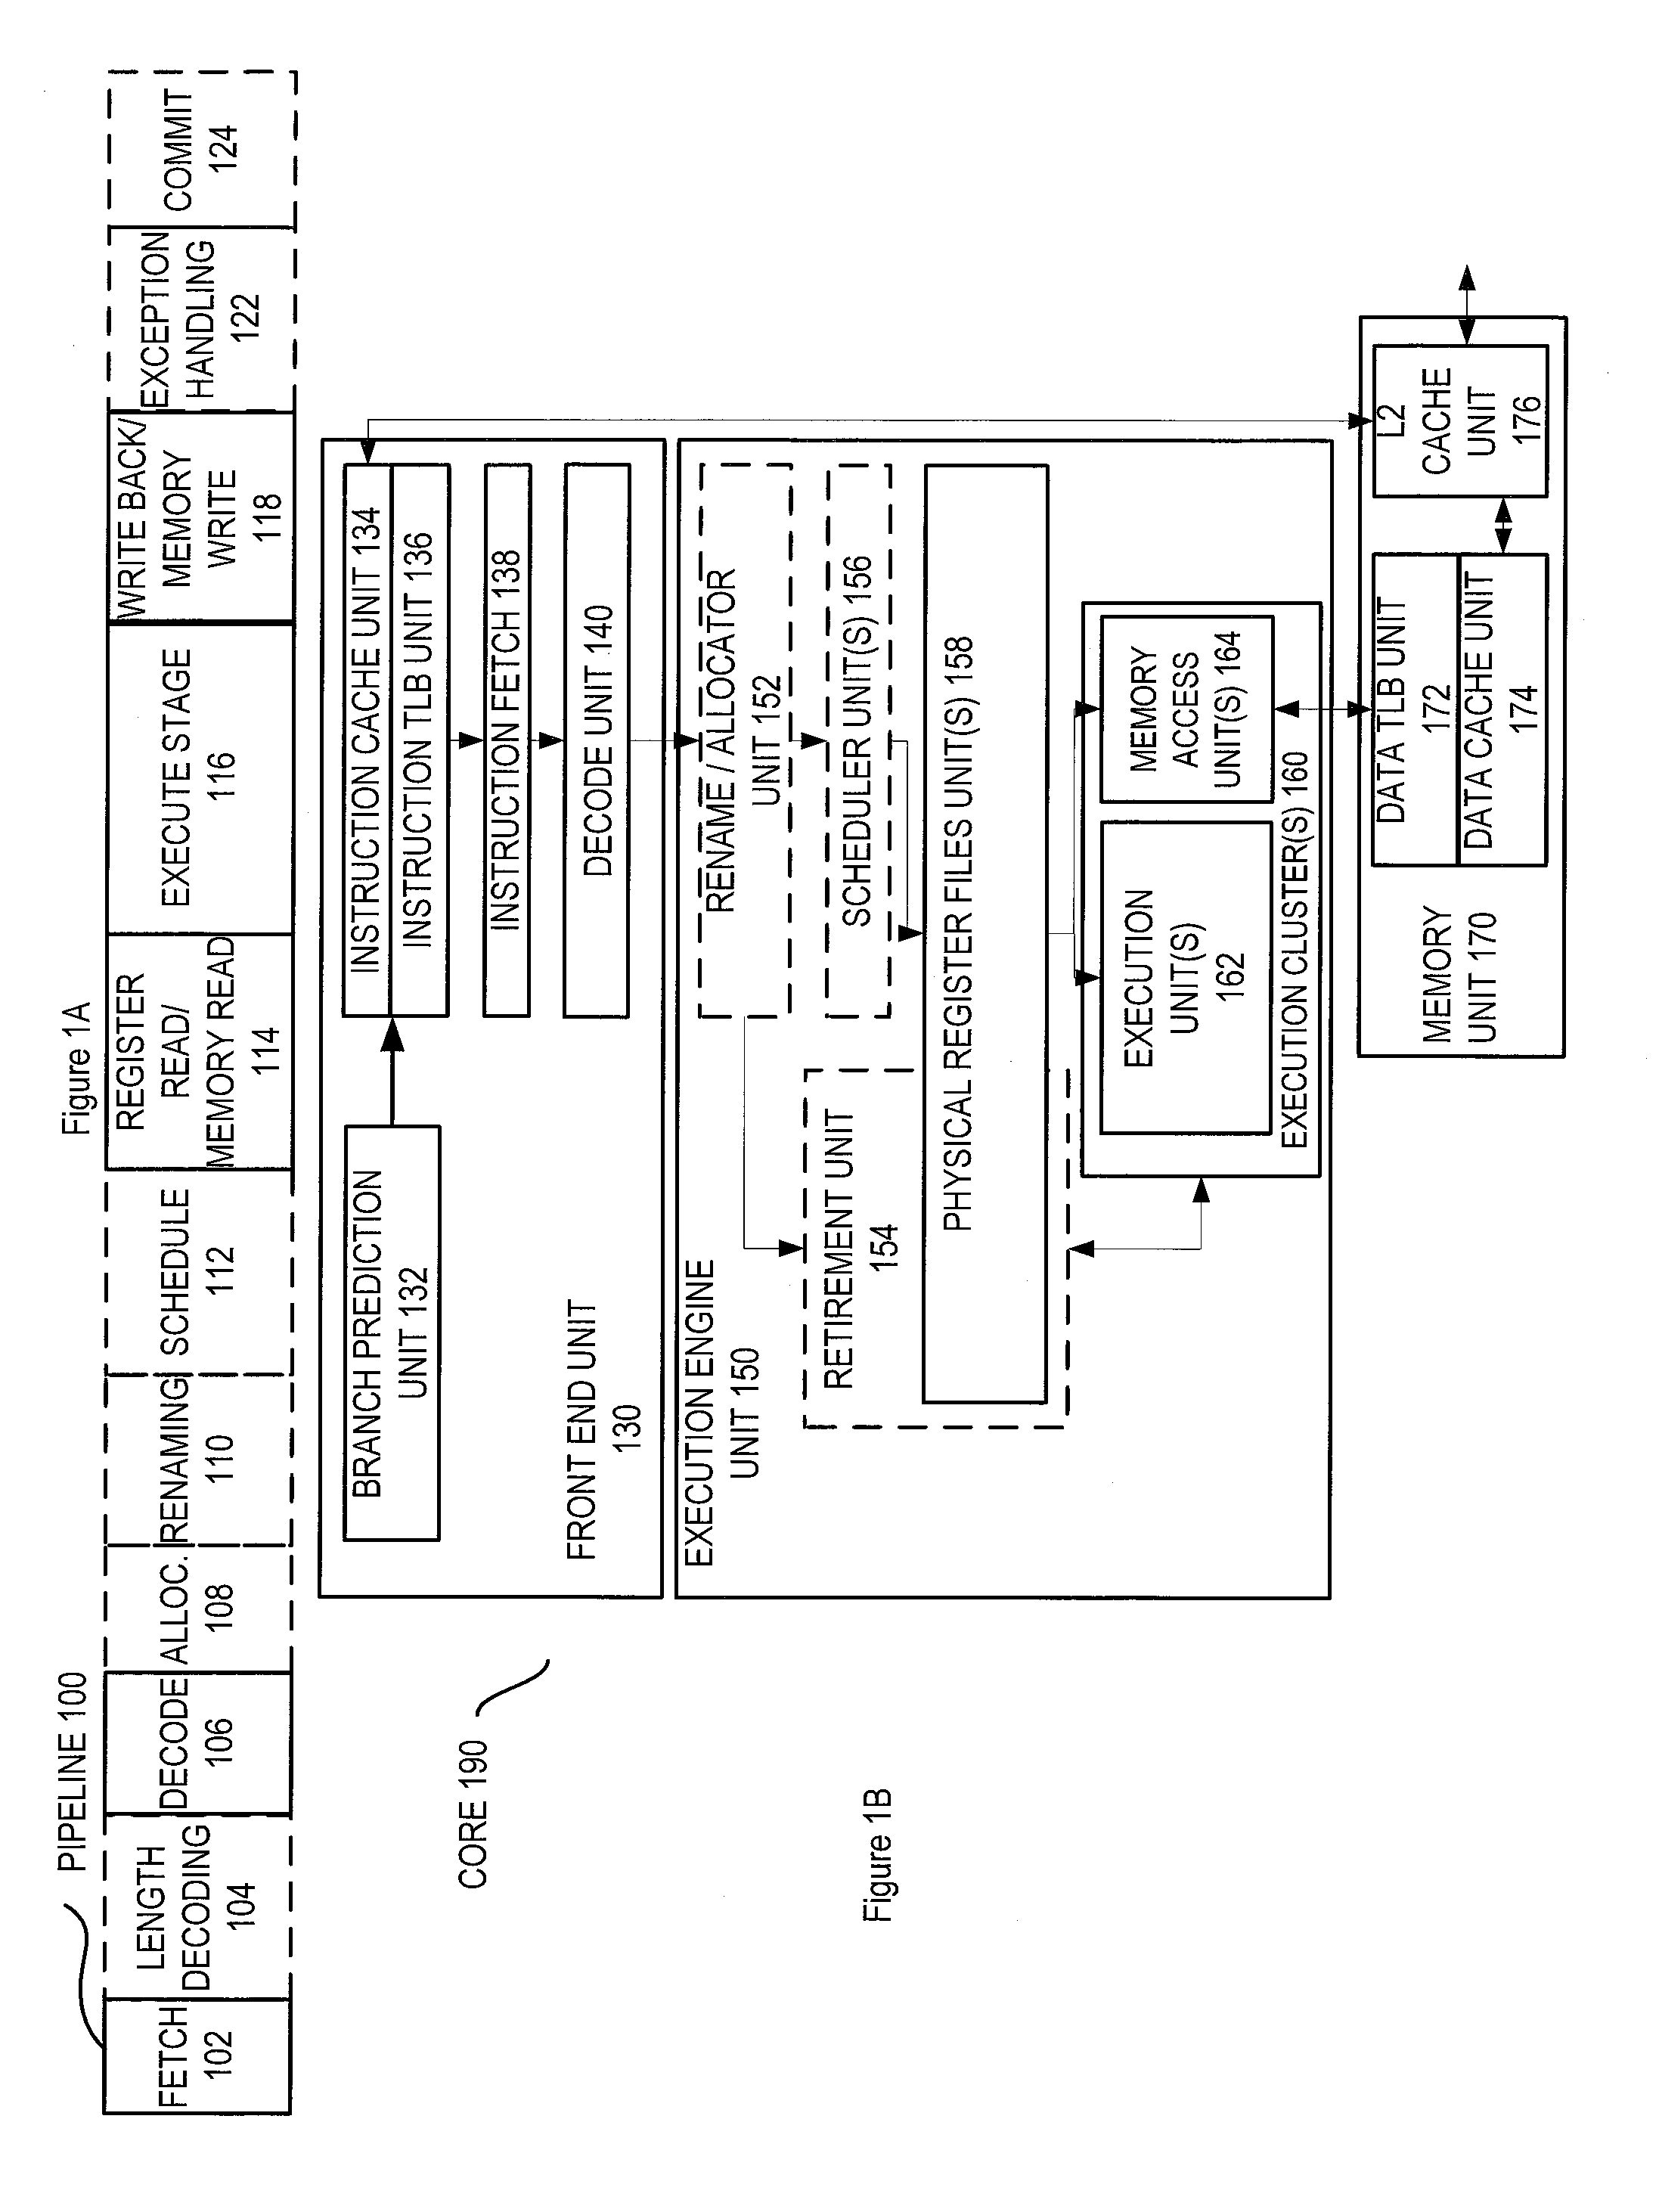 Apparatus and method for sliding window data access